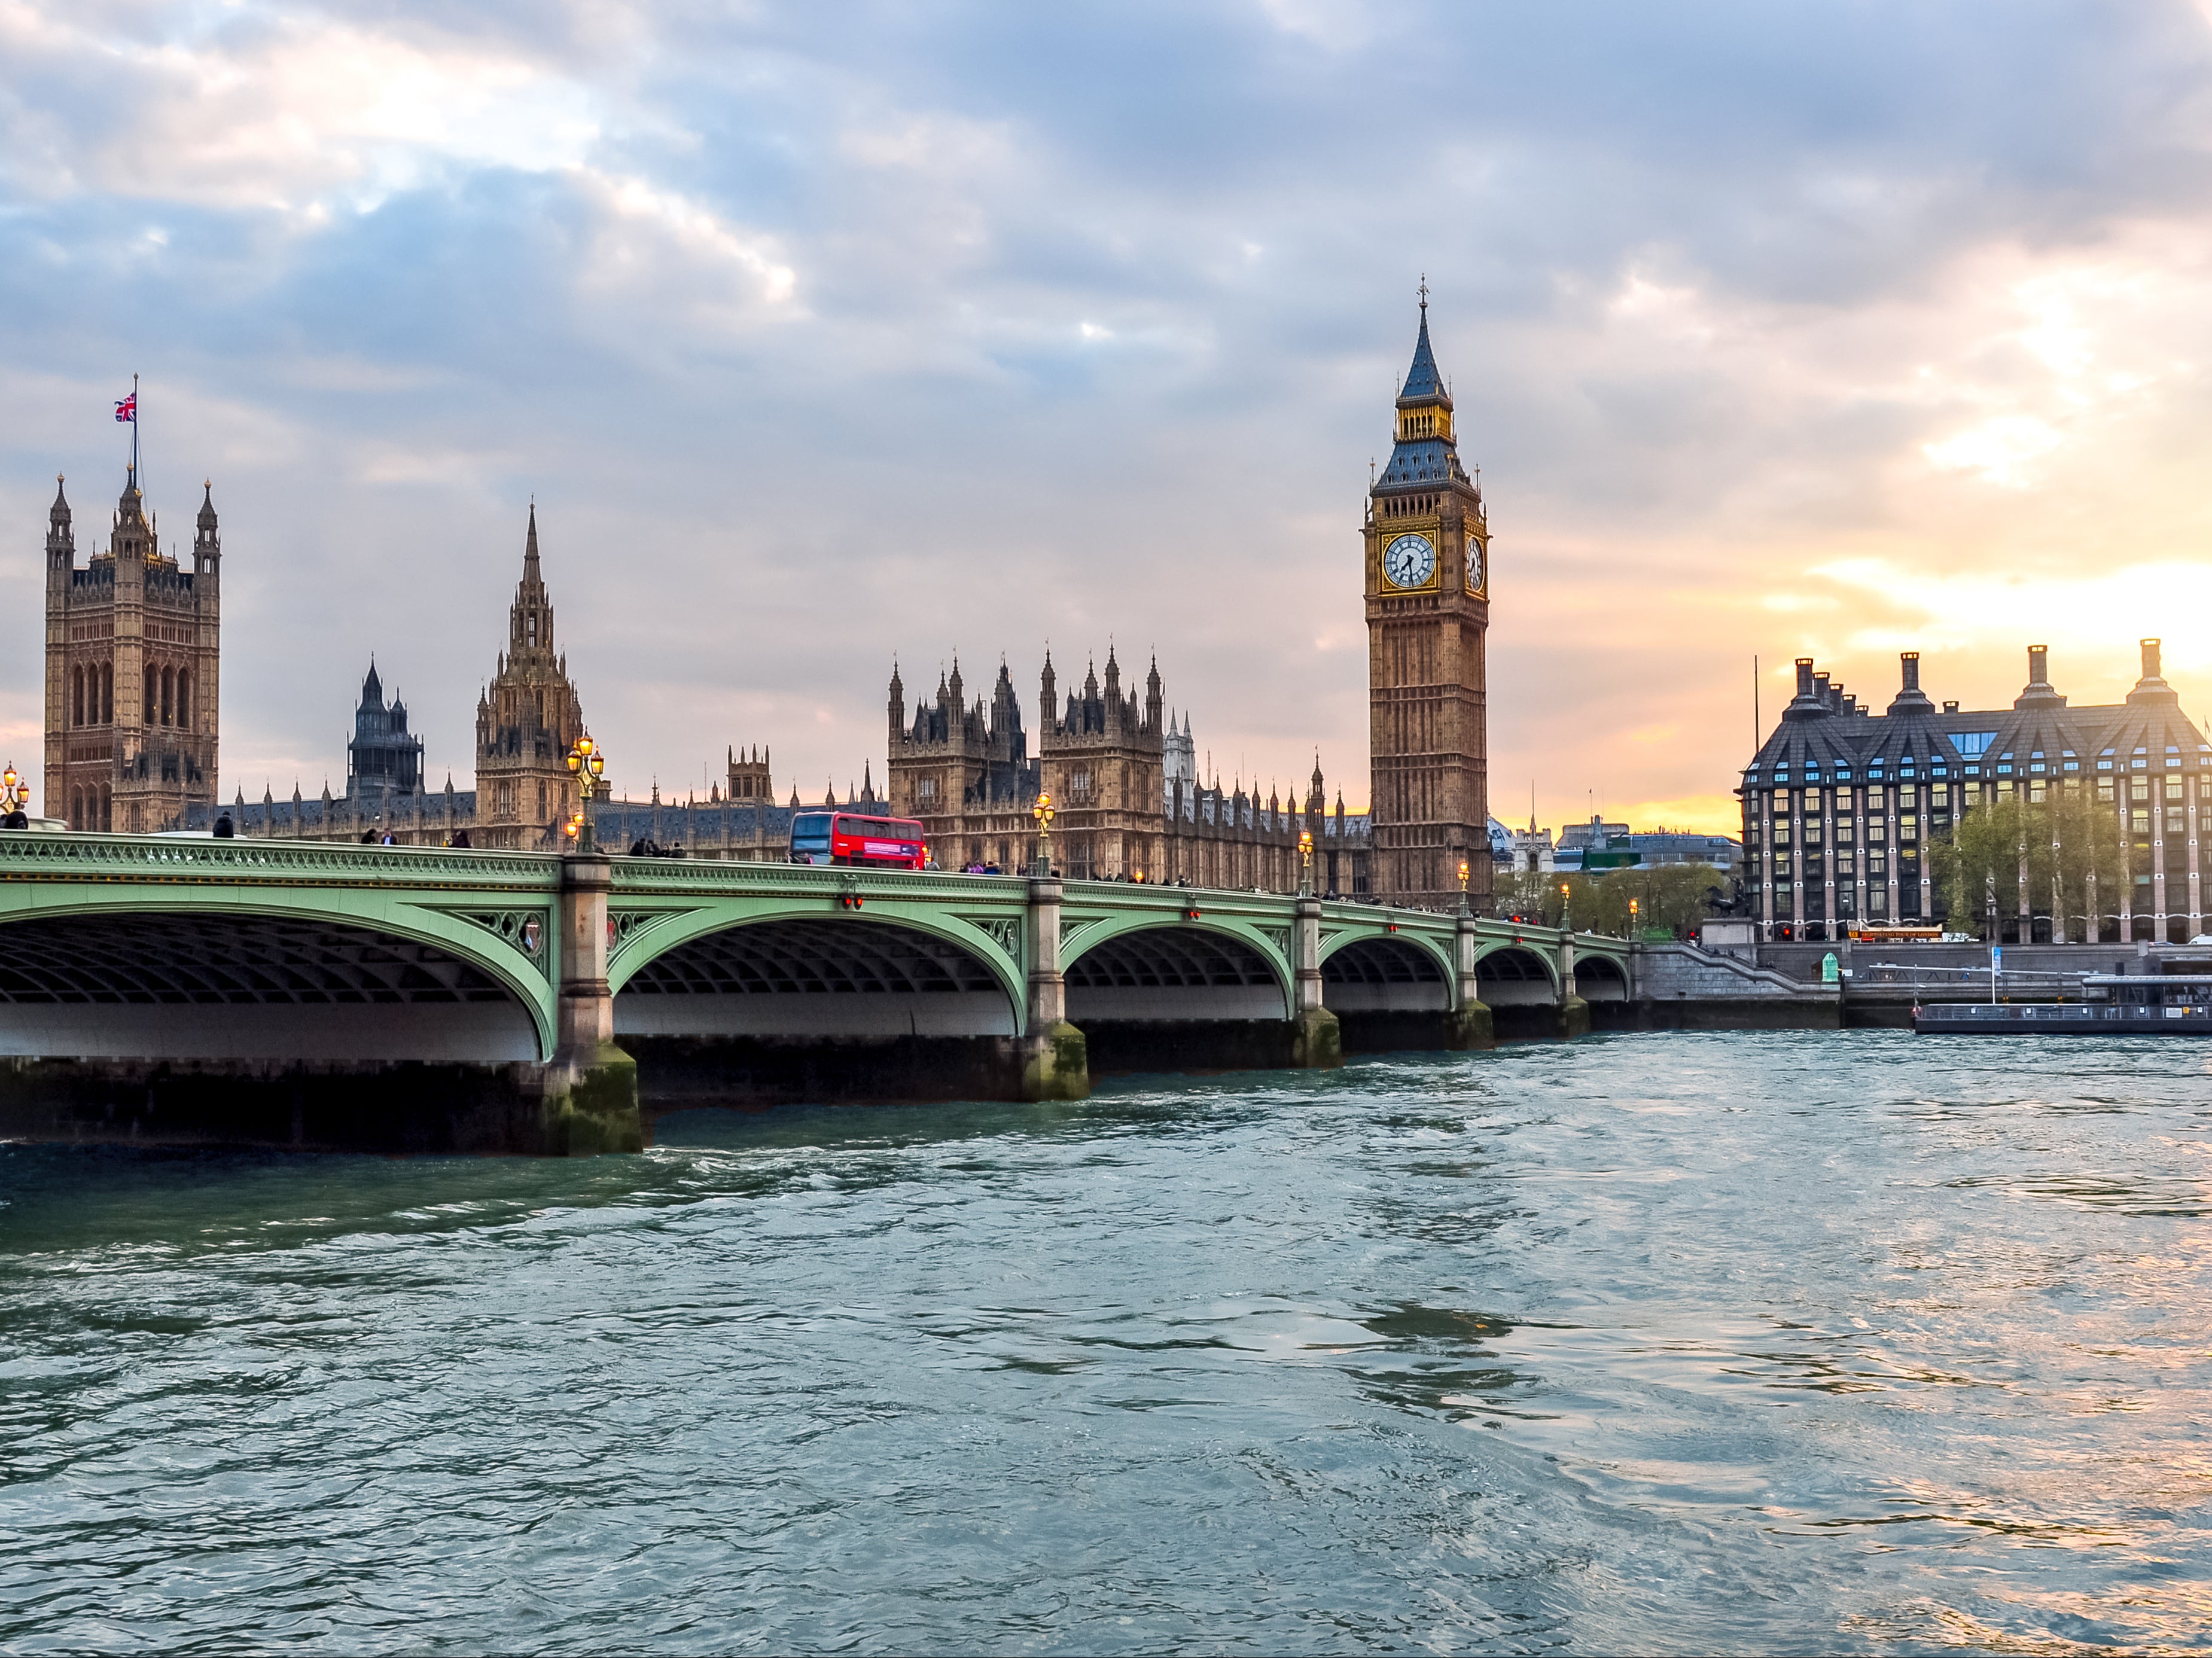 The Houses of Parliament, Big Ben, Westminster Bridge and the Thames